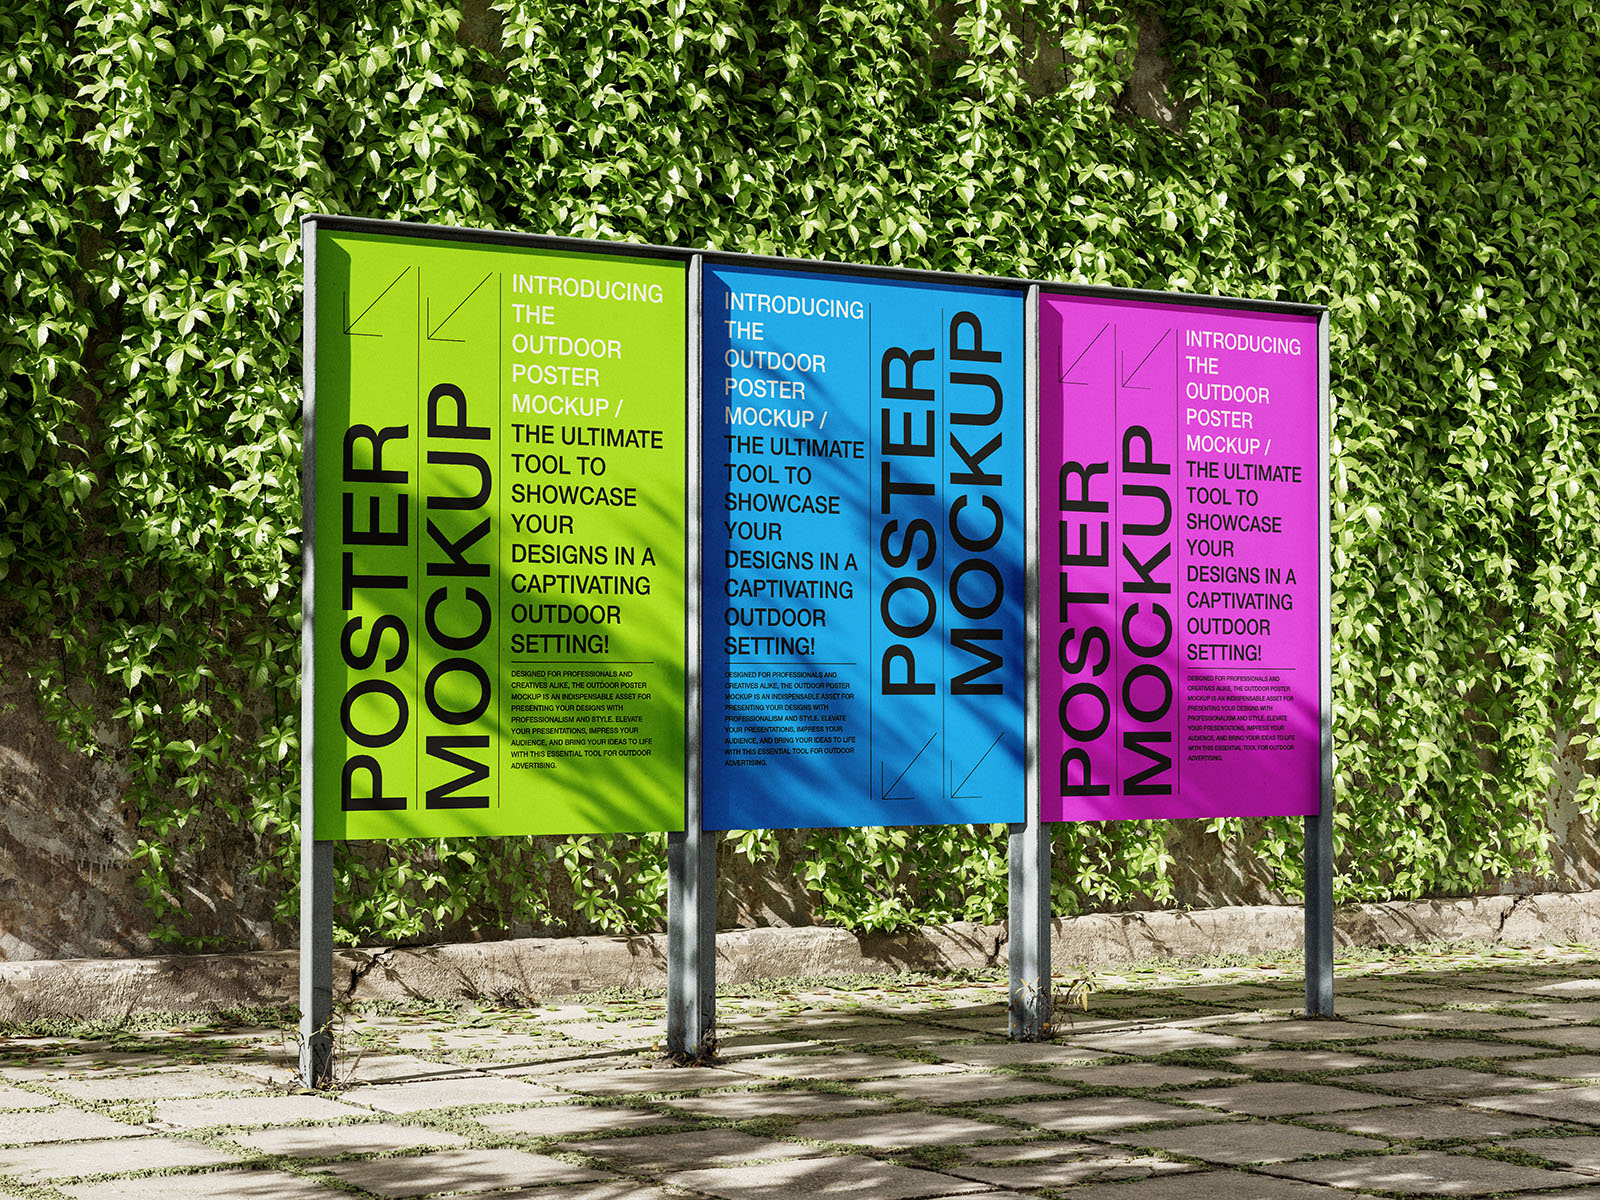 Outdoor posters mockup